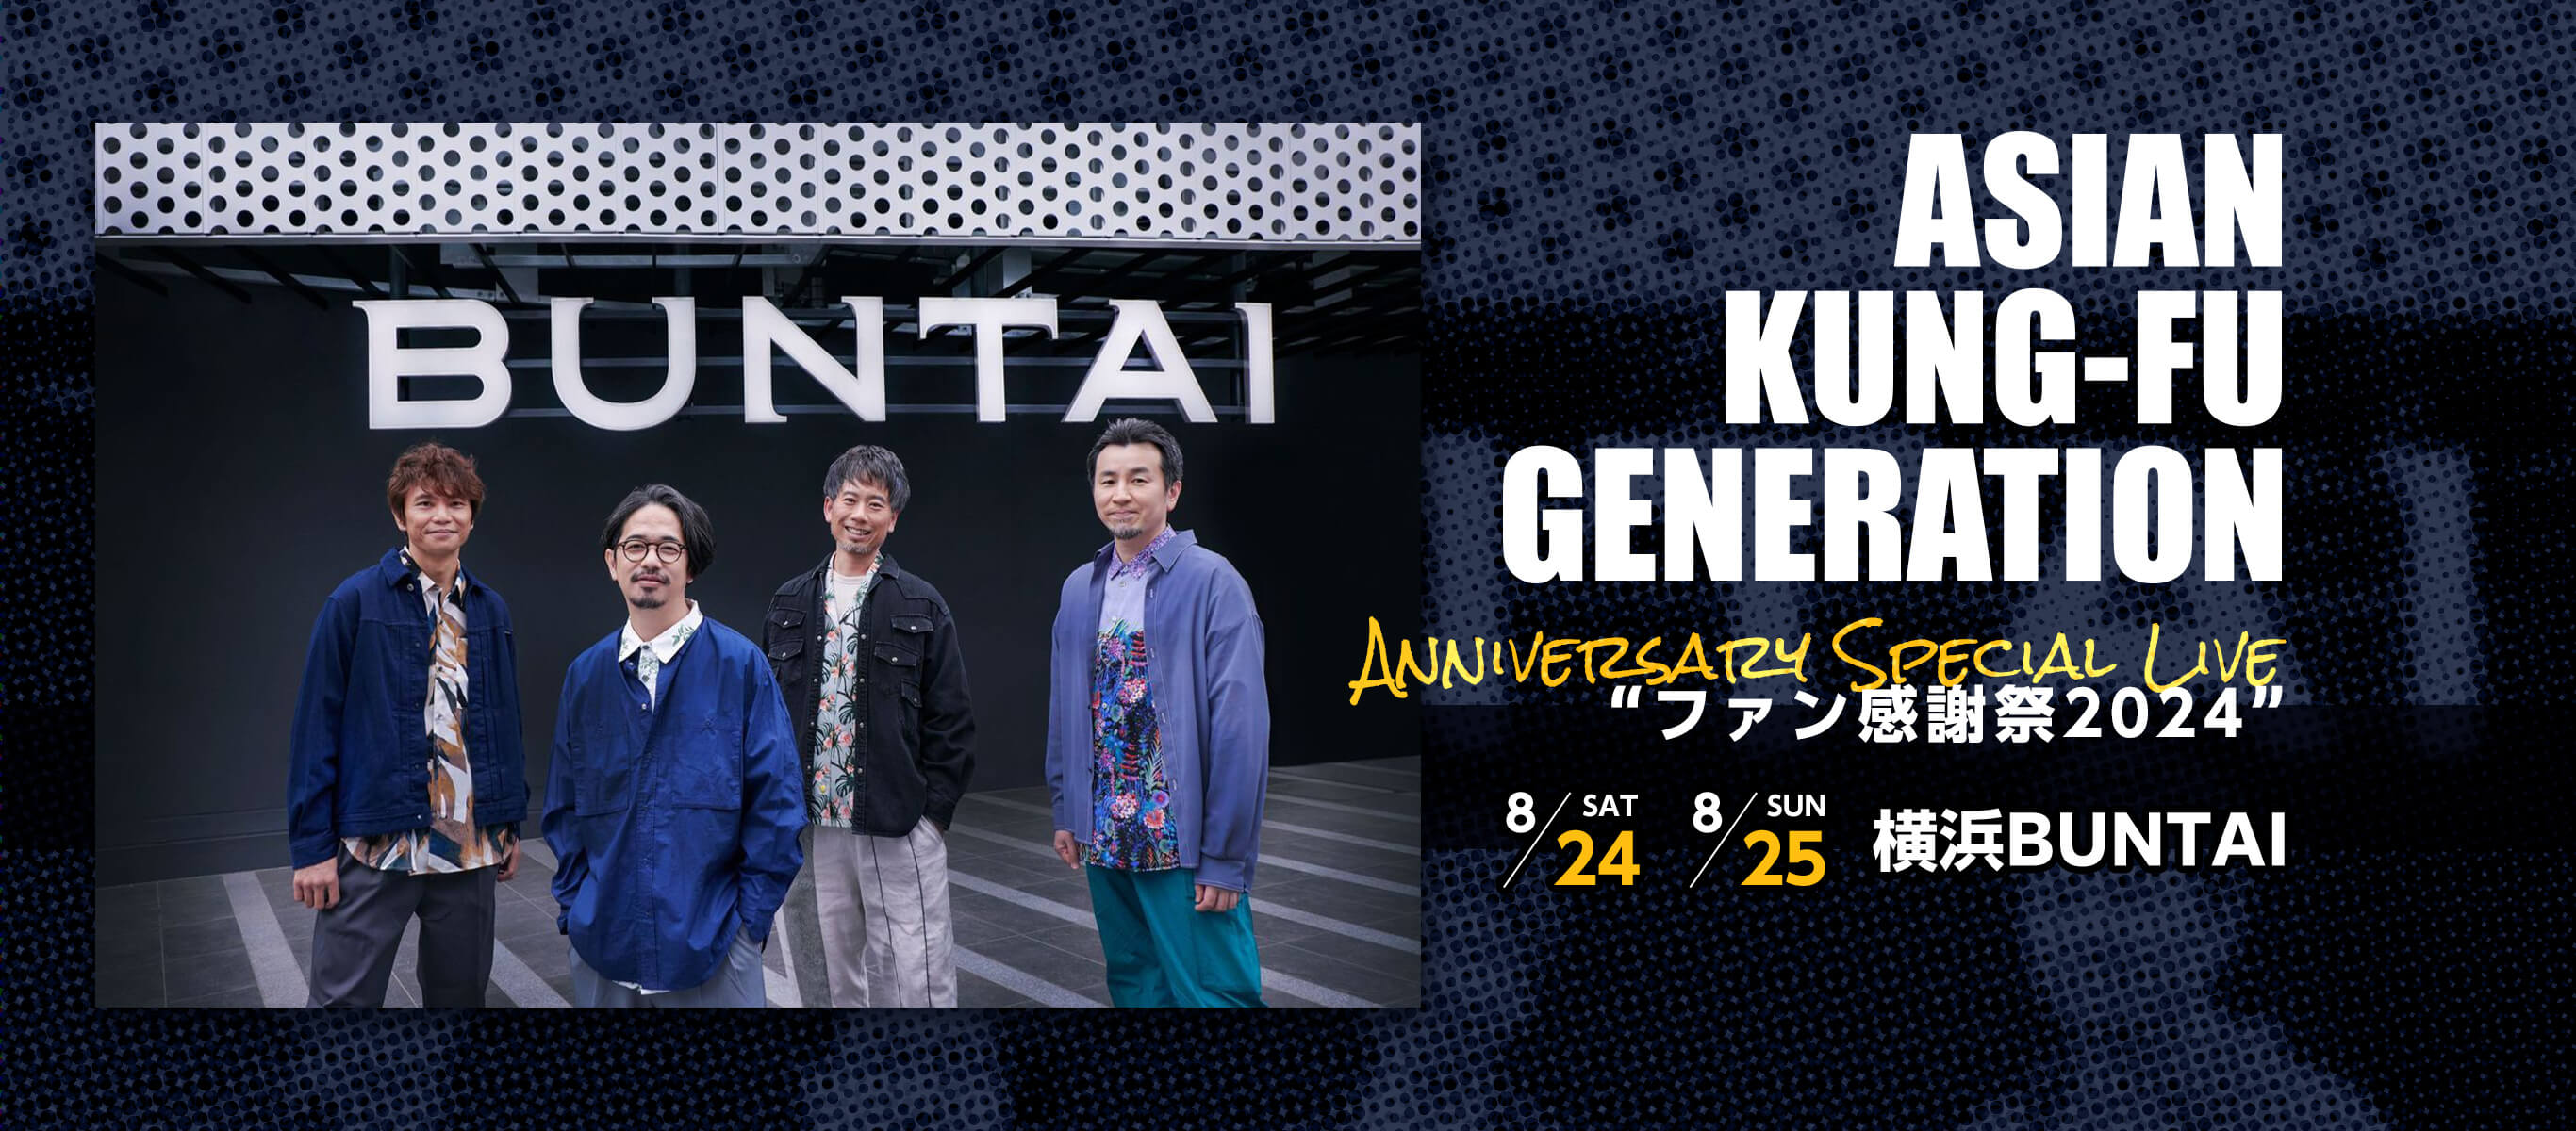 ASIAN KUNG-FU GENERATION Anniversary Special Live "ファン感謝祭2024"